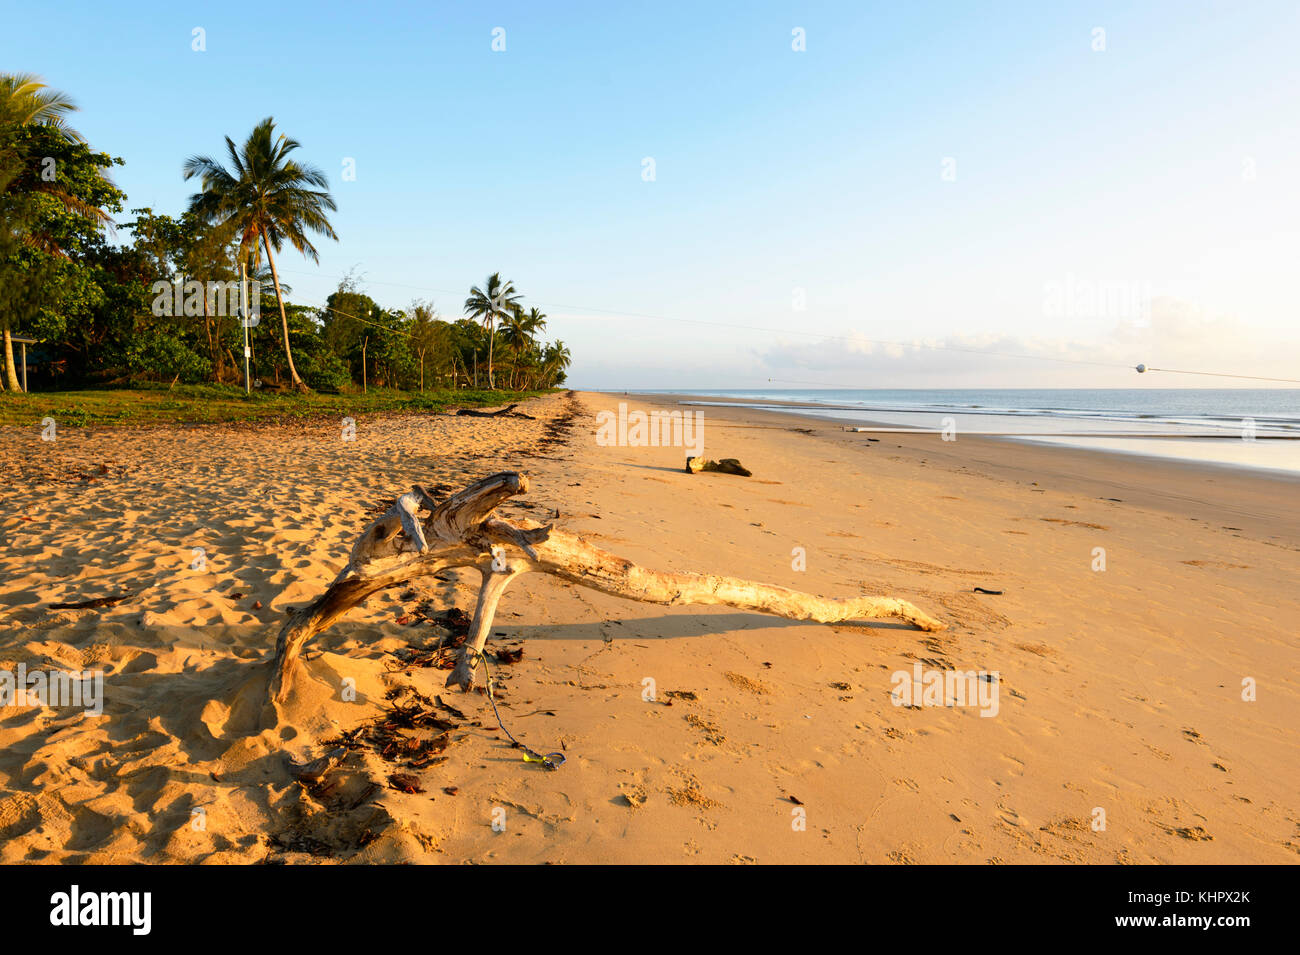 Exotic palm-fringed sandy beach of South Mission Beach on the Coral Sea, Far North Queensland, FNQ, Australia Stock Photo